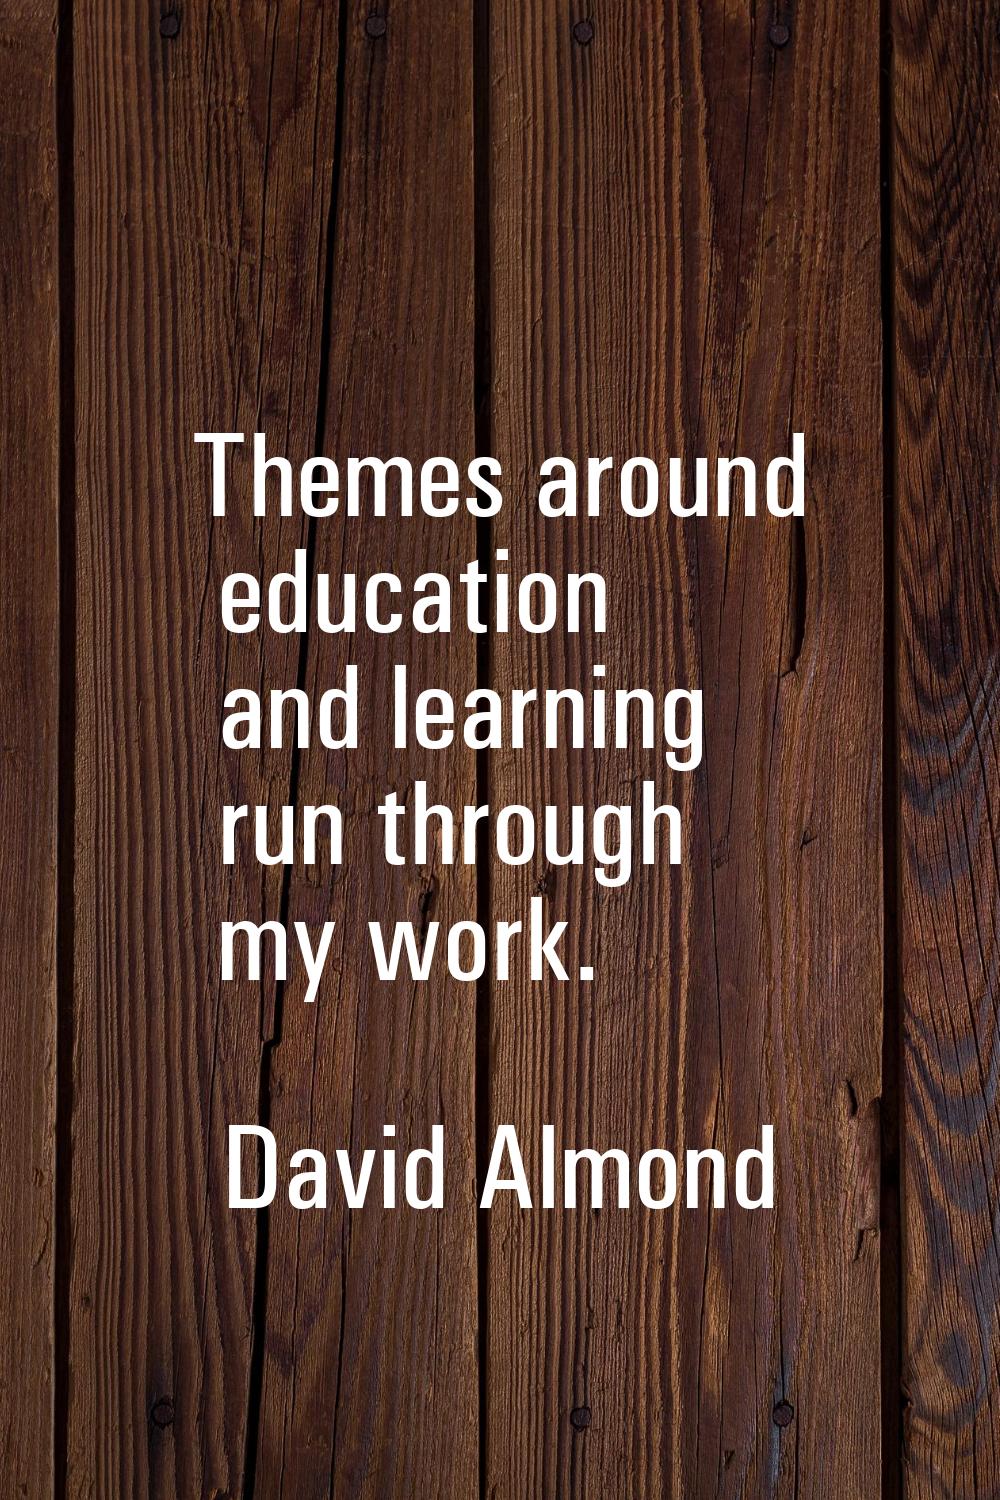 Themes around education and learning run through my work.